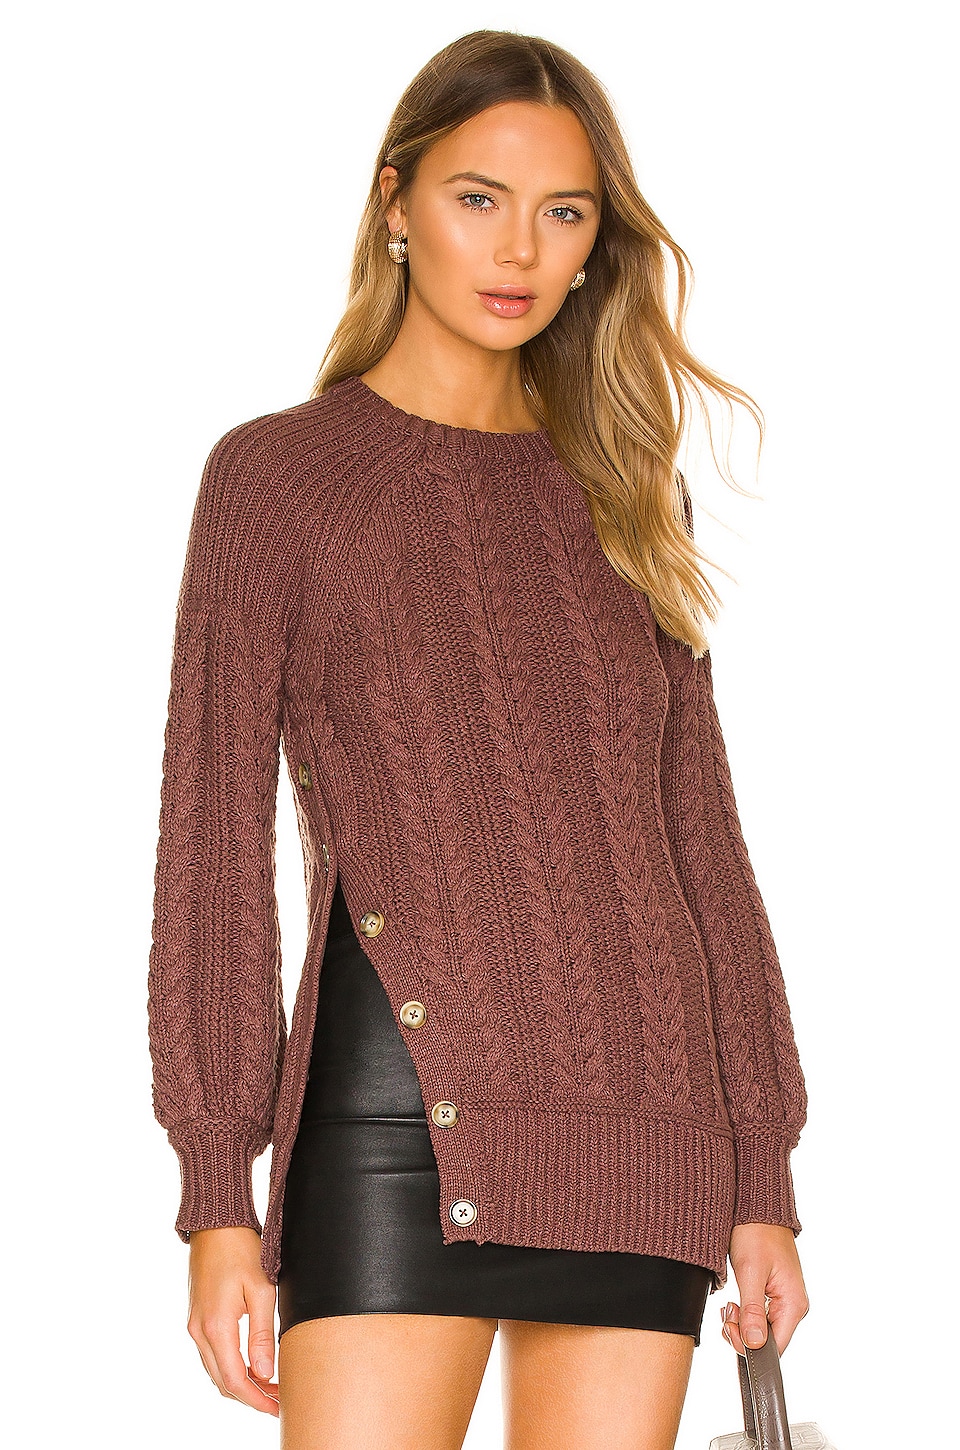 House of Harlow 1960 x REVOLVE Virgo Cableknit Sweater Brown